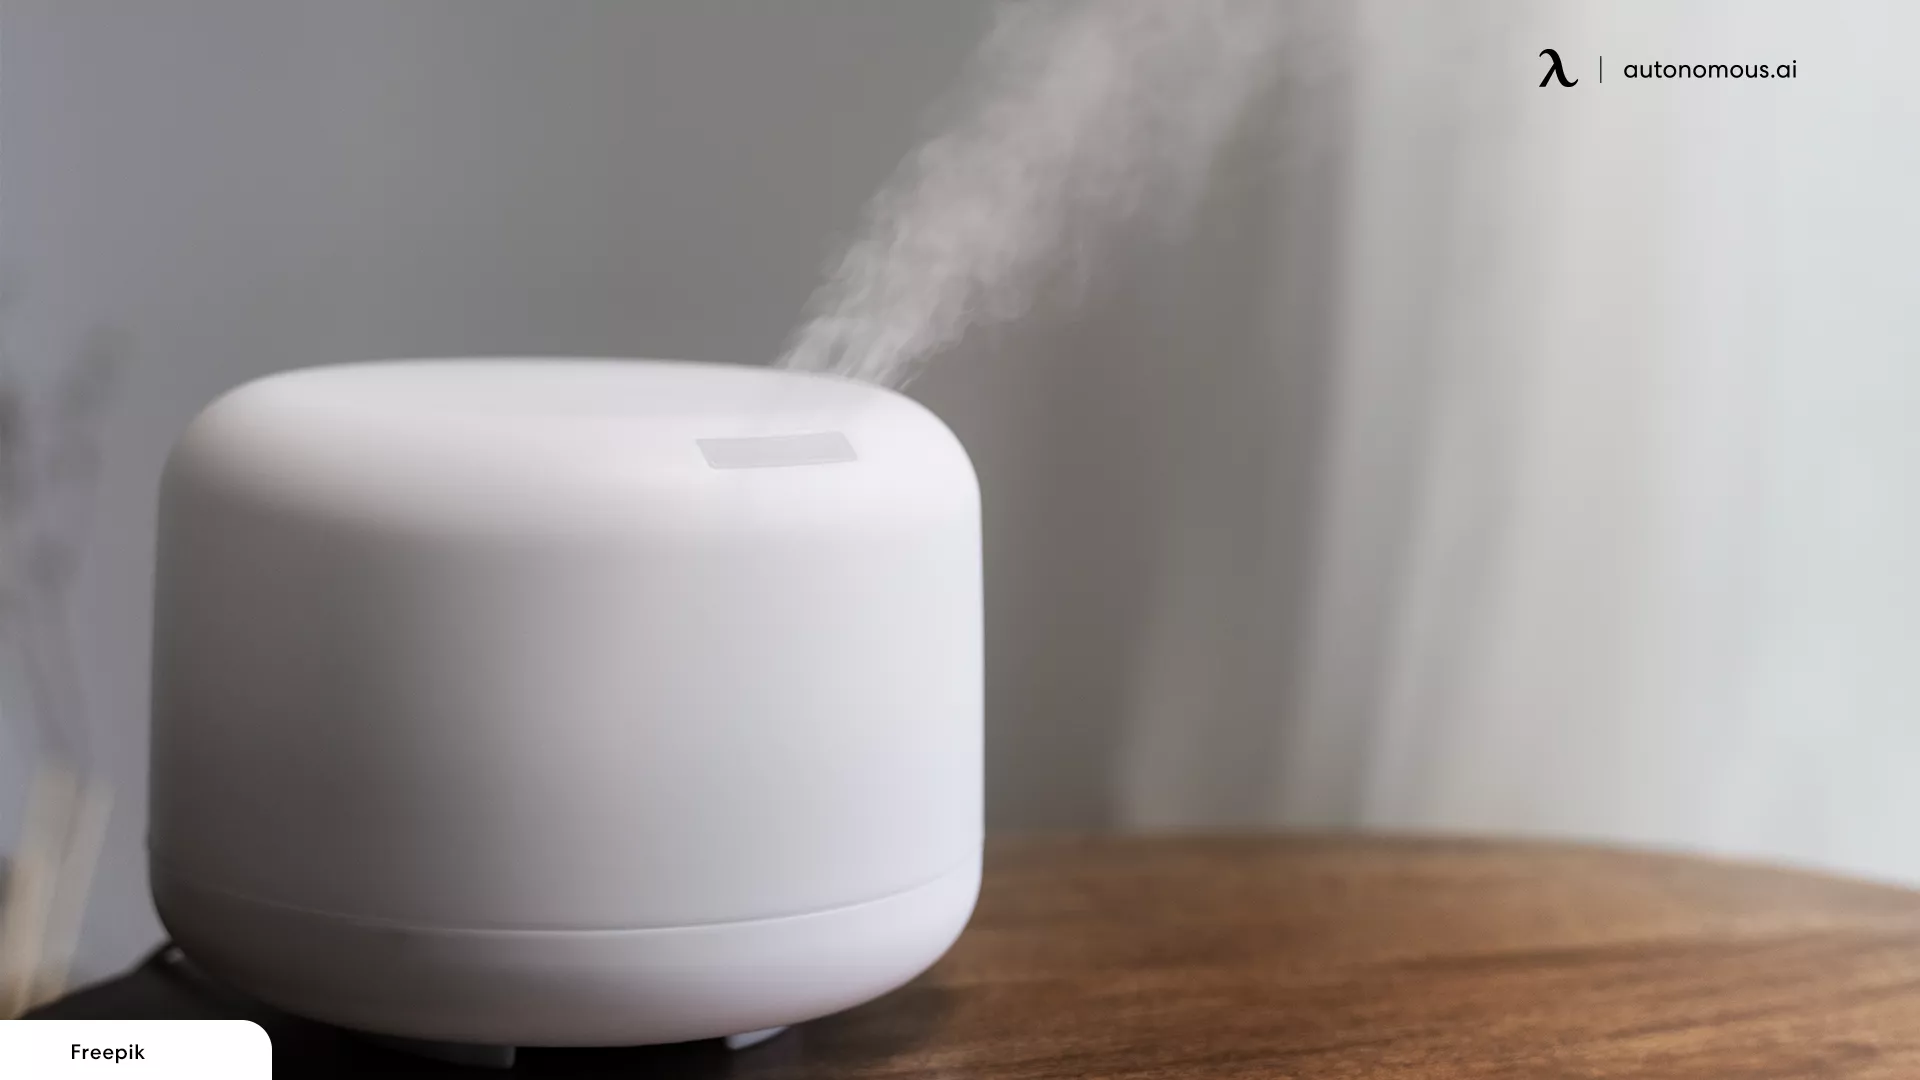 Humidifier: What is it for?